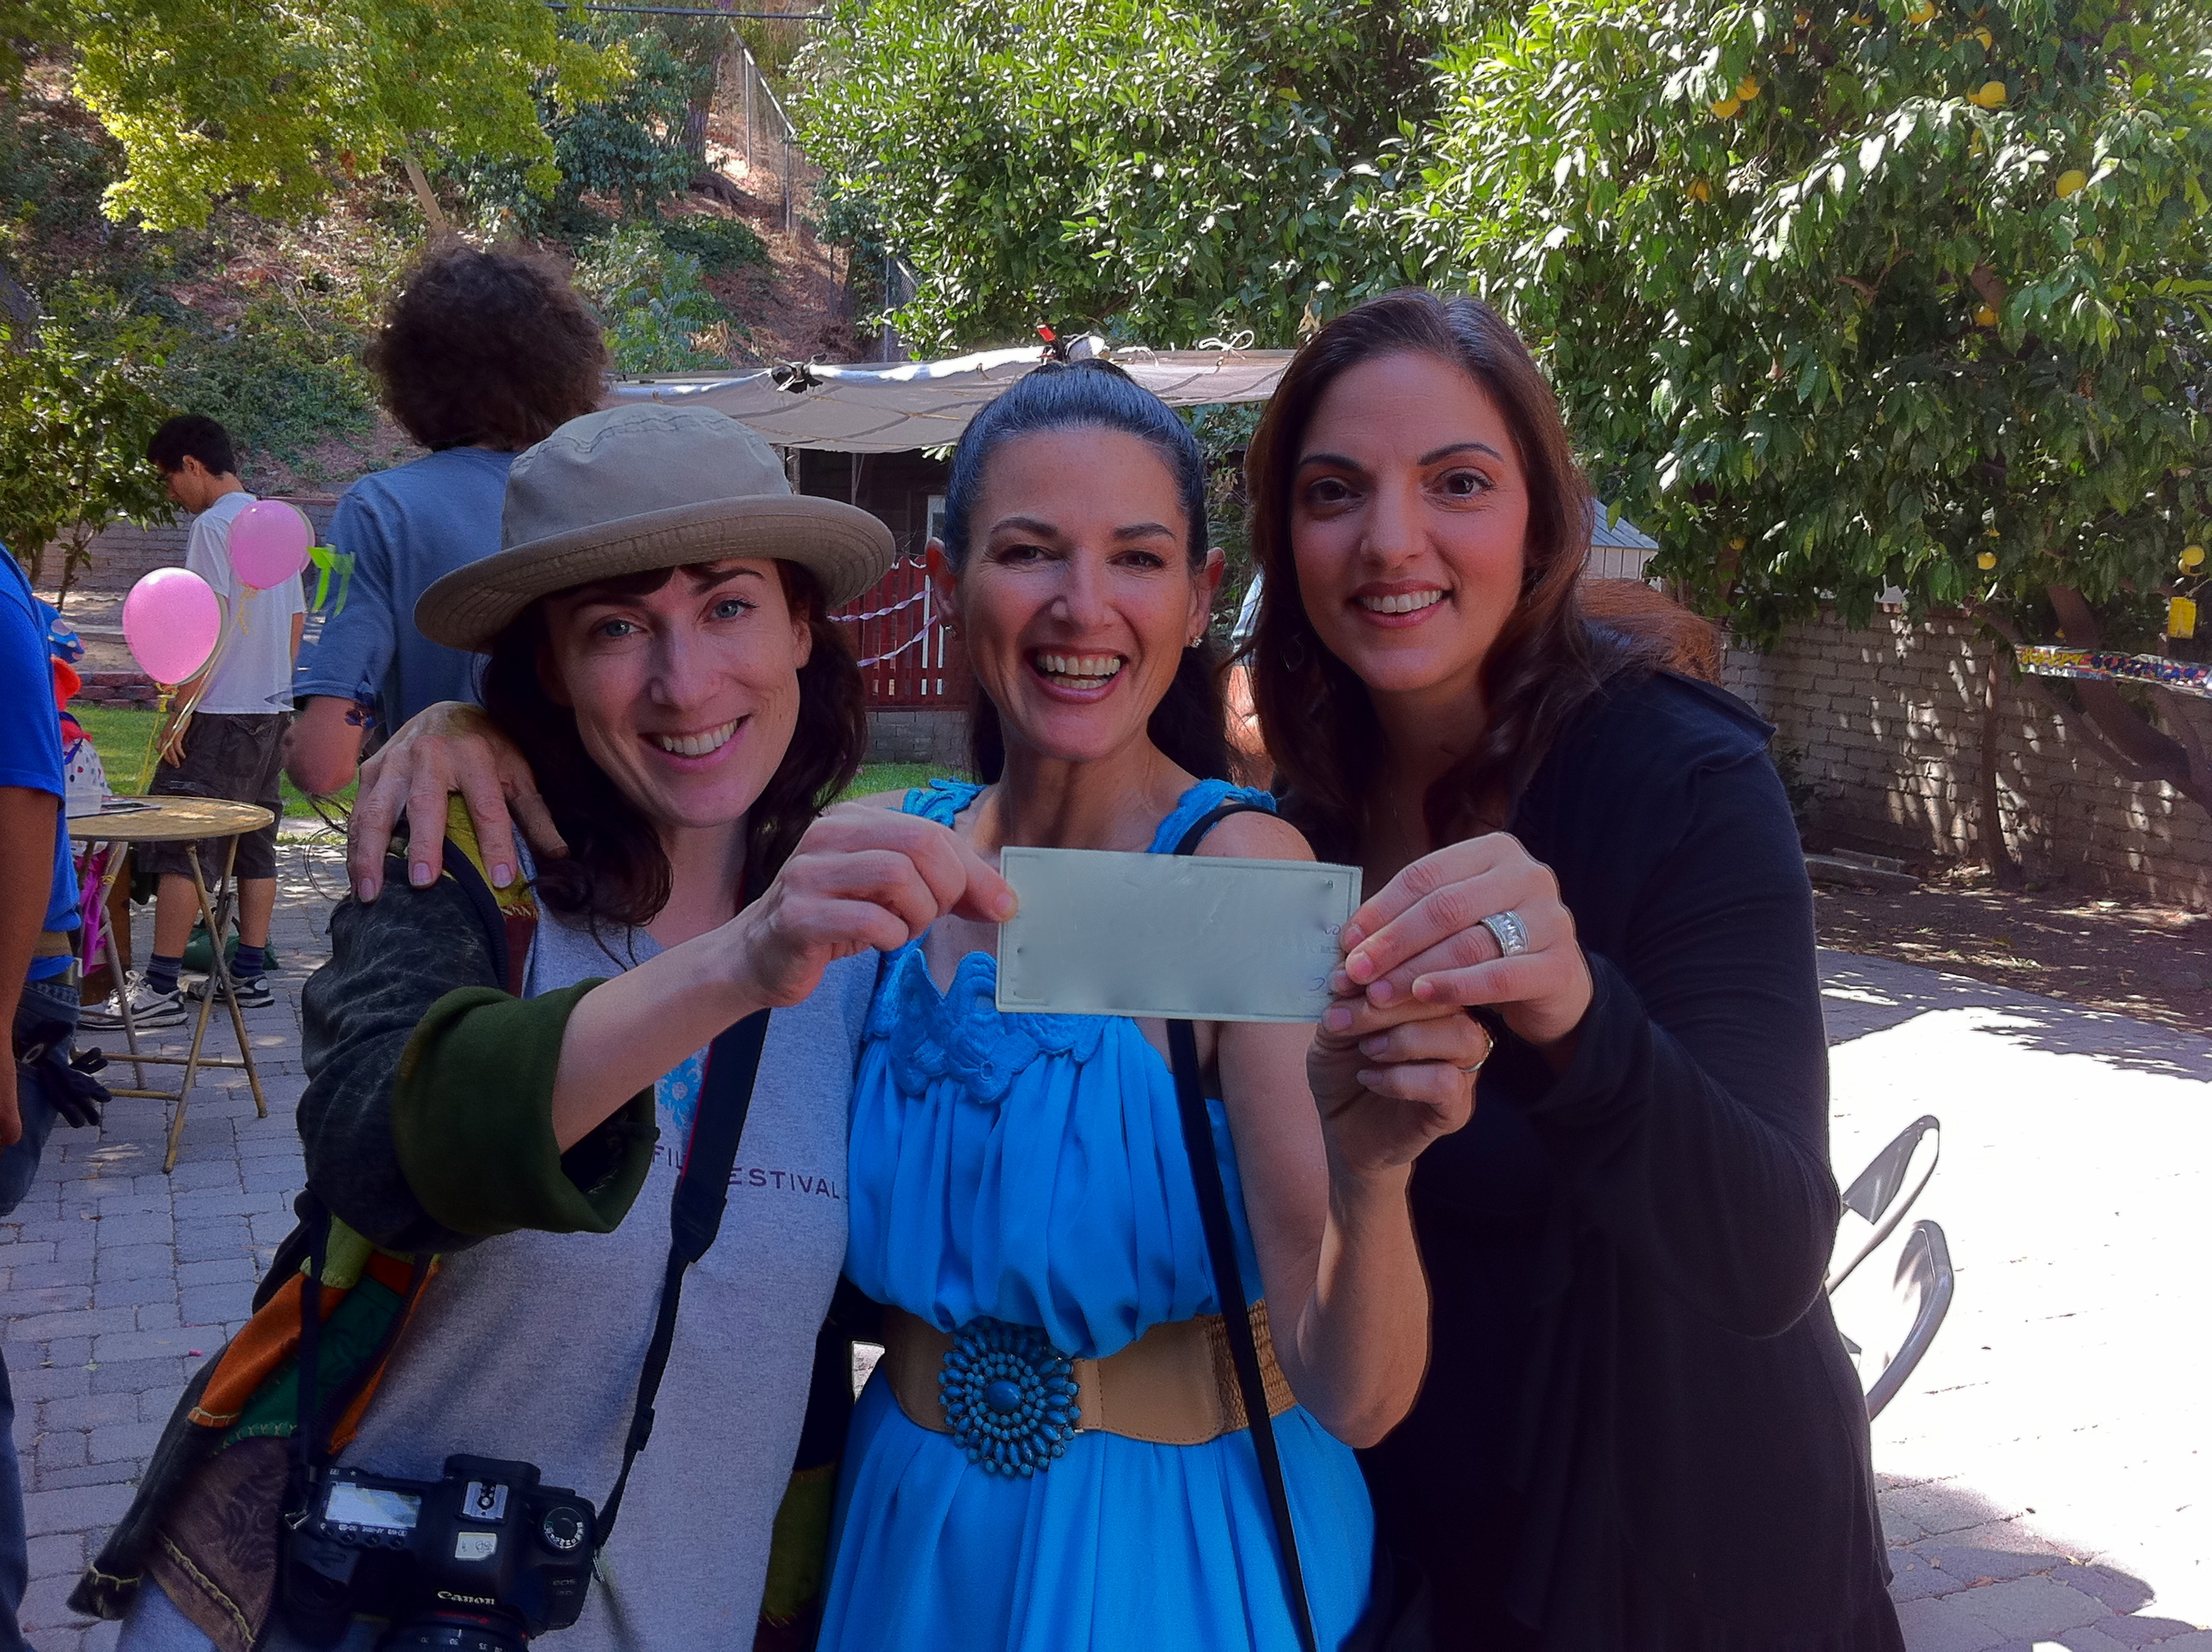 Executive Producer, Sharon A. Fox (in the middle)on the set of ODD BRODSKY with Director Cindy Baer to the left and producer Thomai Hatsios at the right holding up the big check Sharon wrote towards the production.